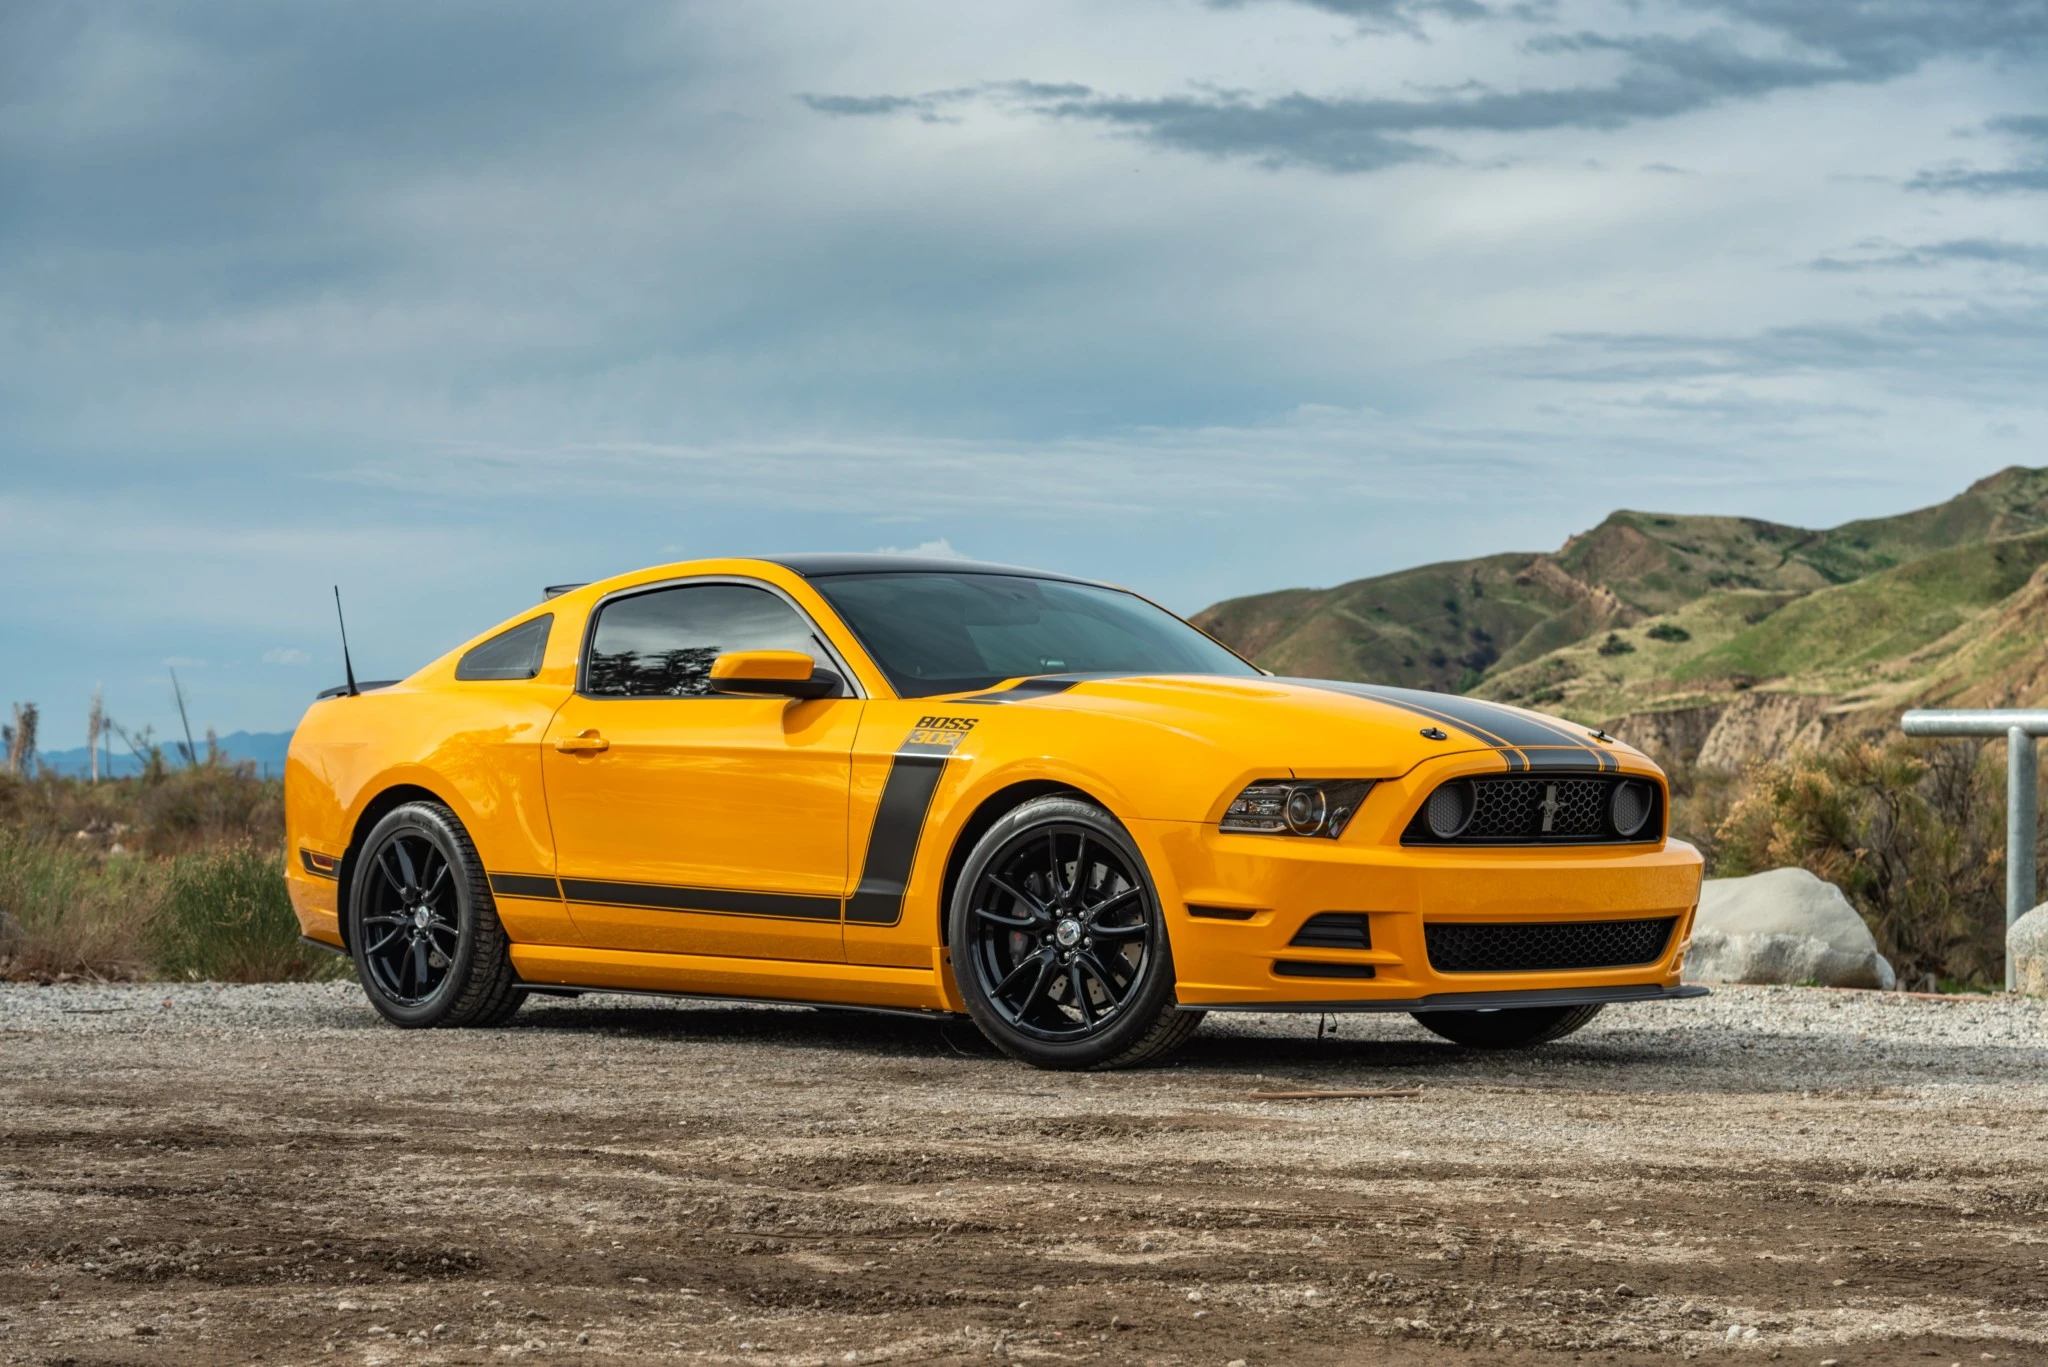 Mustang Of The Day: 2013 Ford Mustang Boss 302